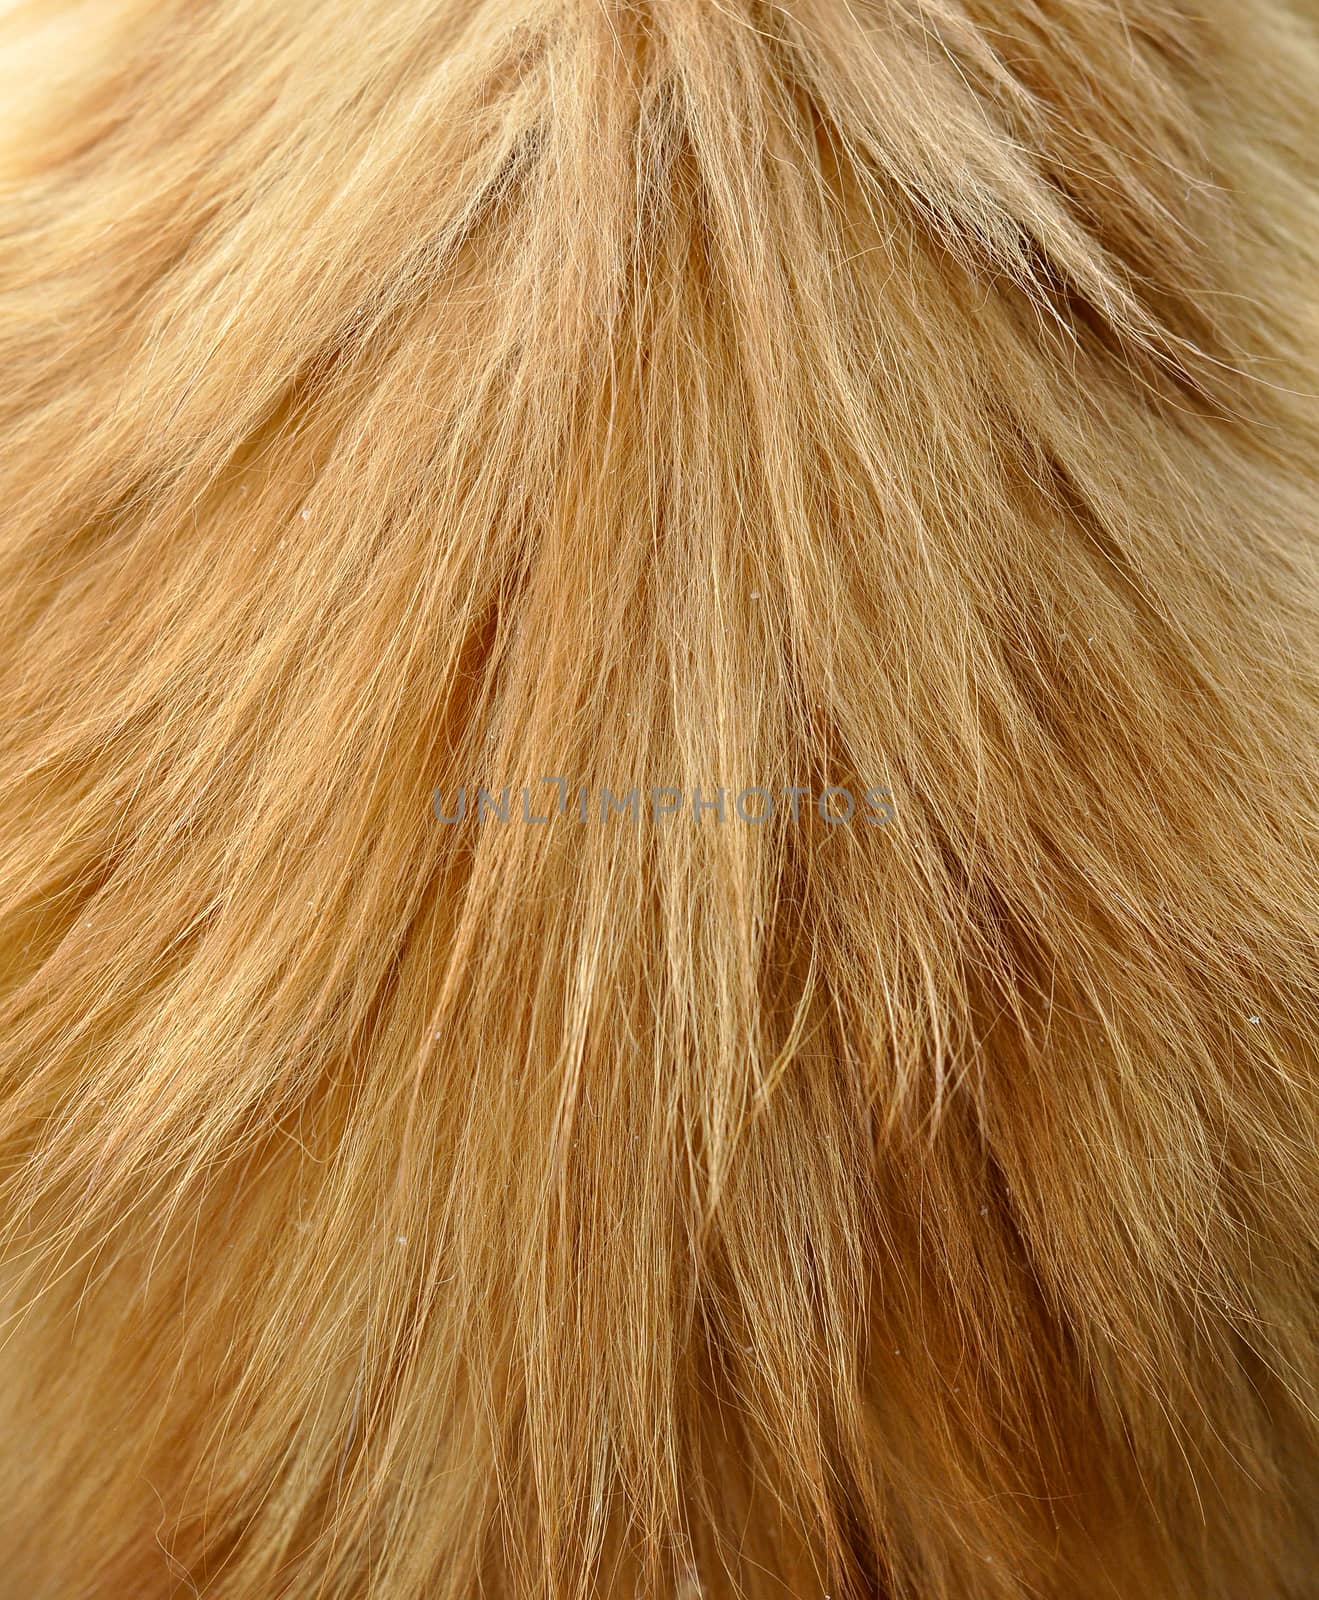 Long hair ginger cat fur background or texture. by infinityyy